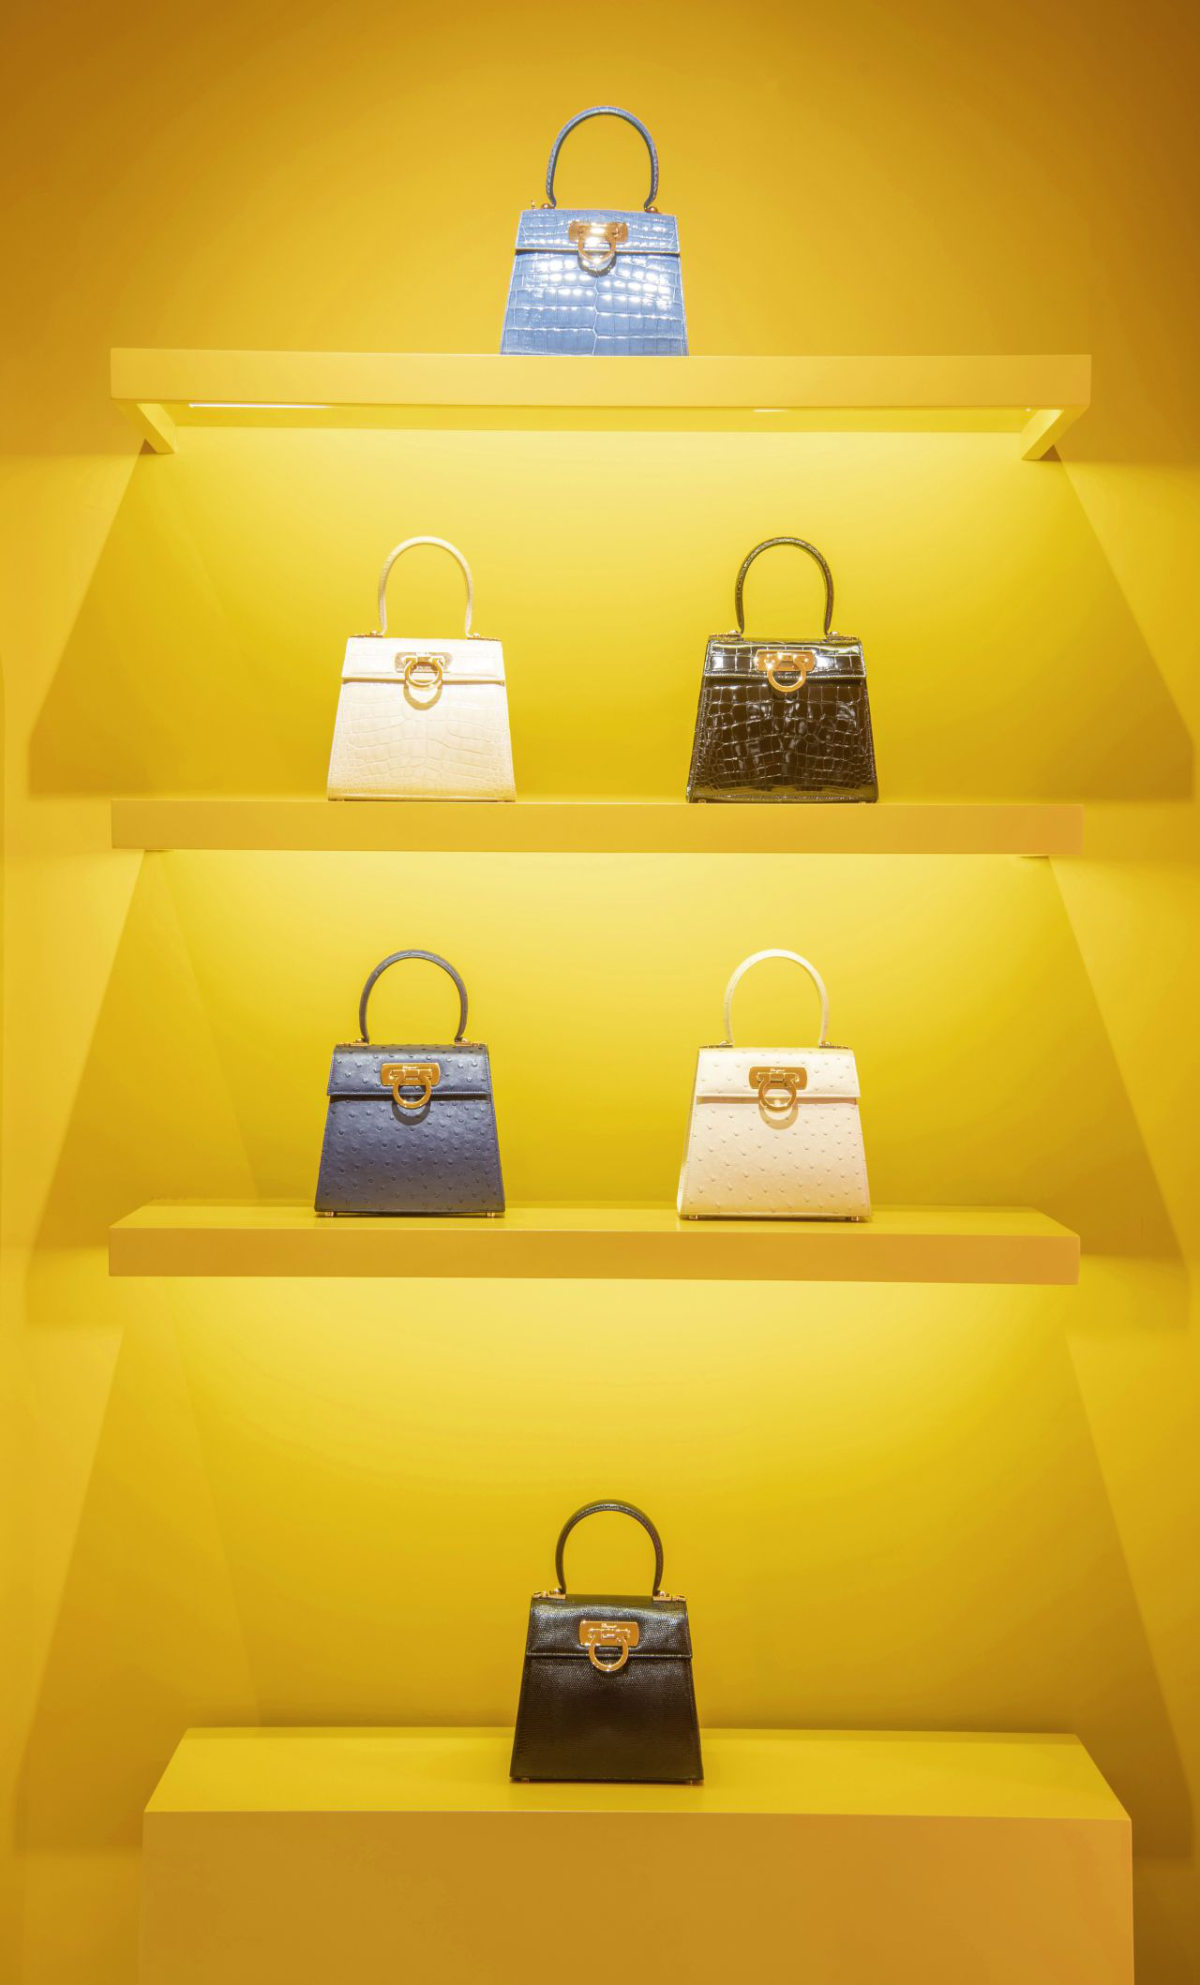 Salvatore Ferragamo Unveiled A New Pop-up Store At SOGO Zhongxiao In Taipei, Taiwan